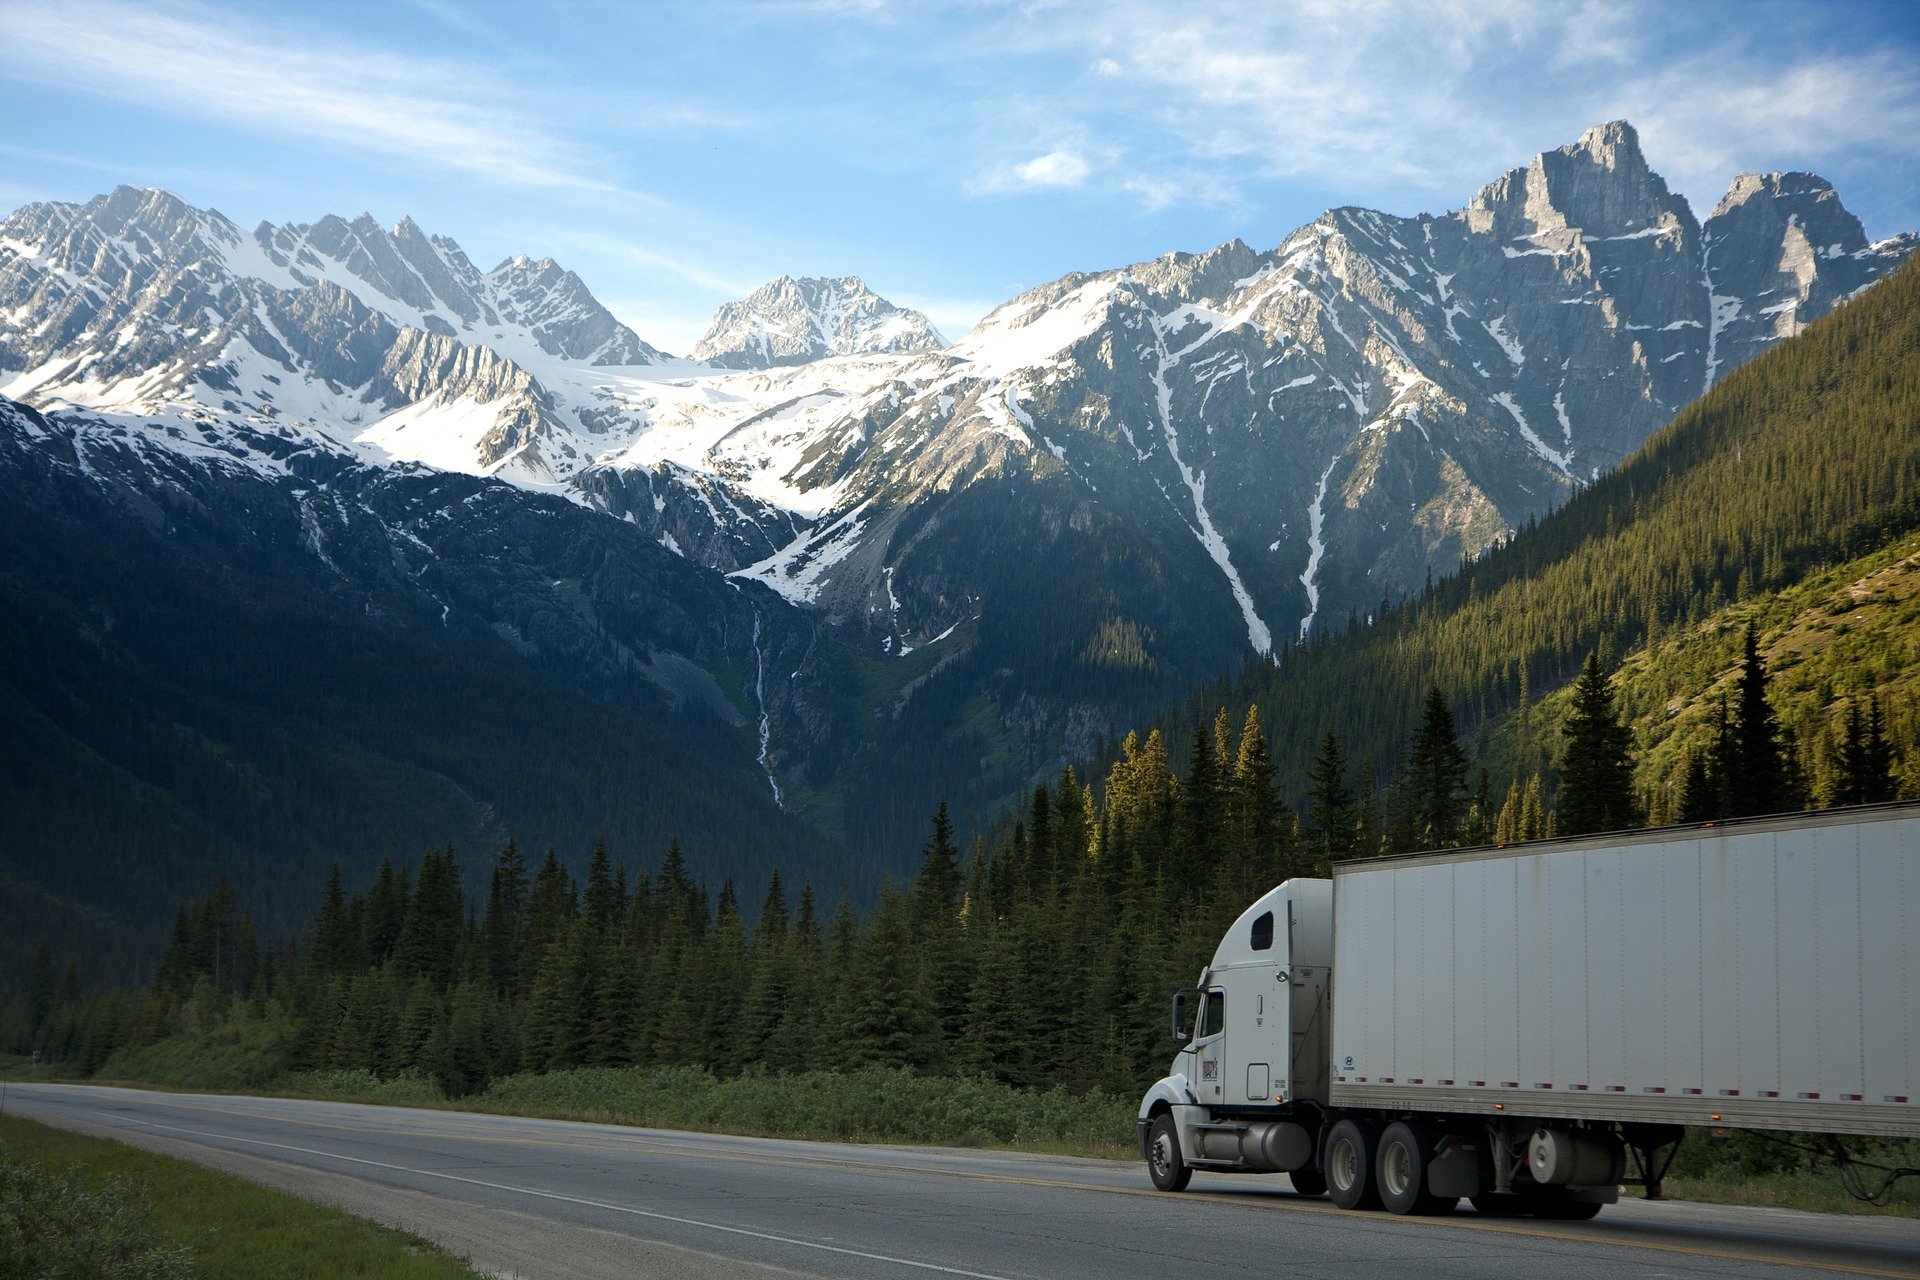 The Best Scenic Drives in America (According to Truckers)